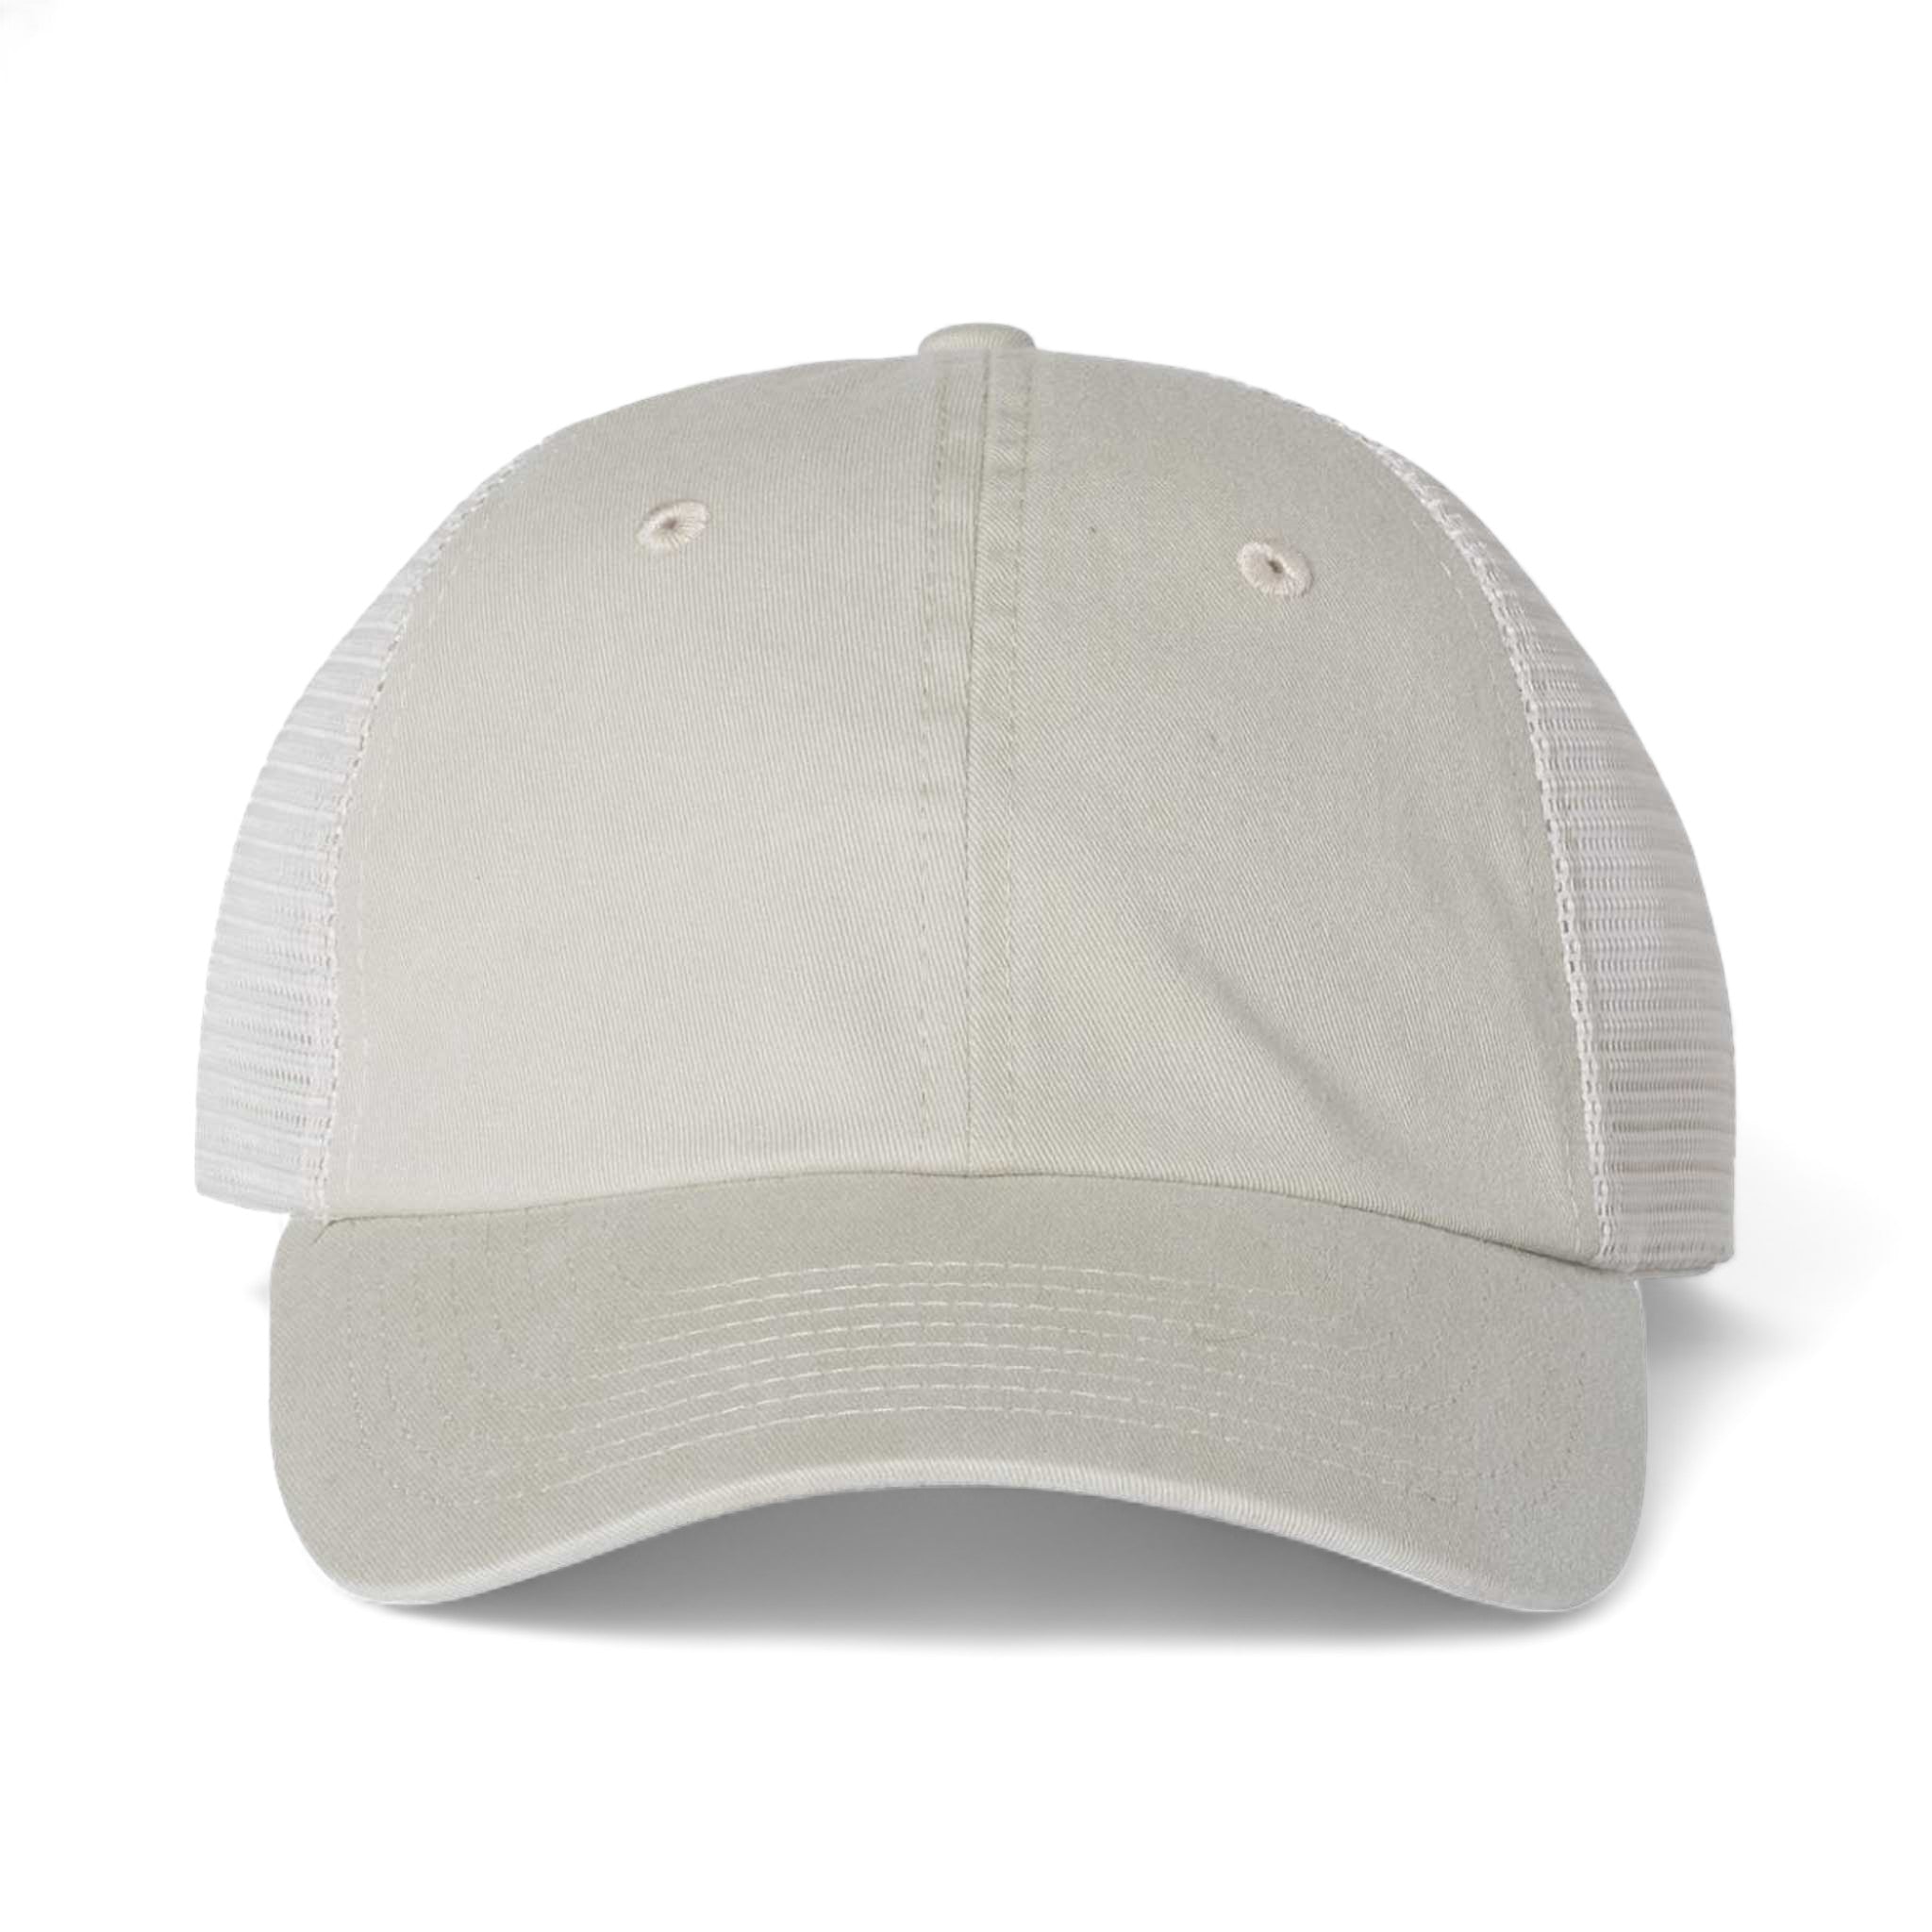 Front view of Sportsman SP510 custom hat in stone and stone